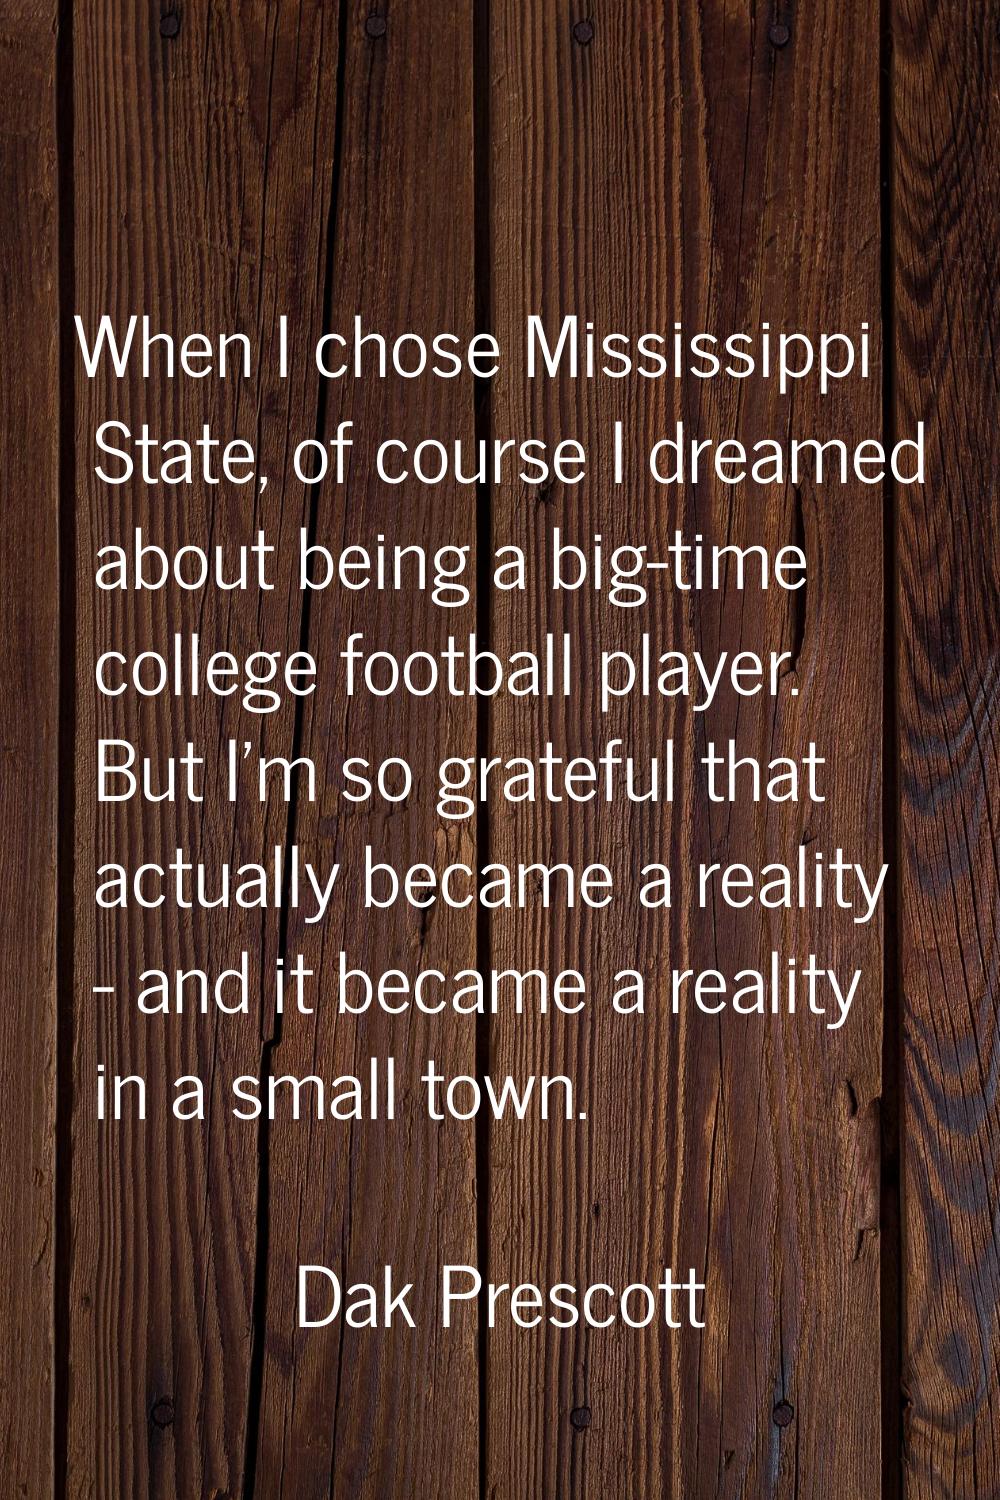 When I chose Mississippi State, of course I dreamed about being a big-time college football player.